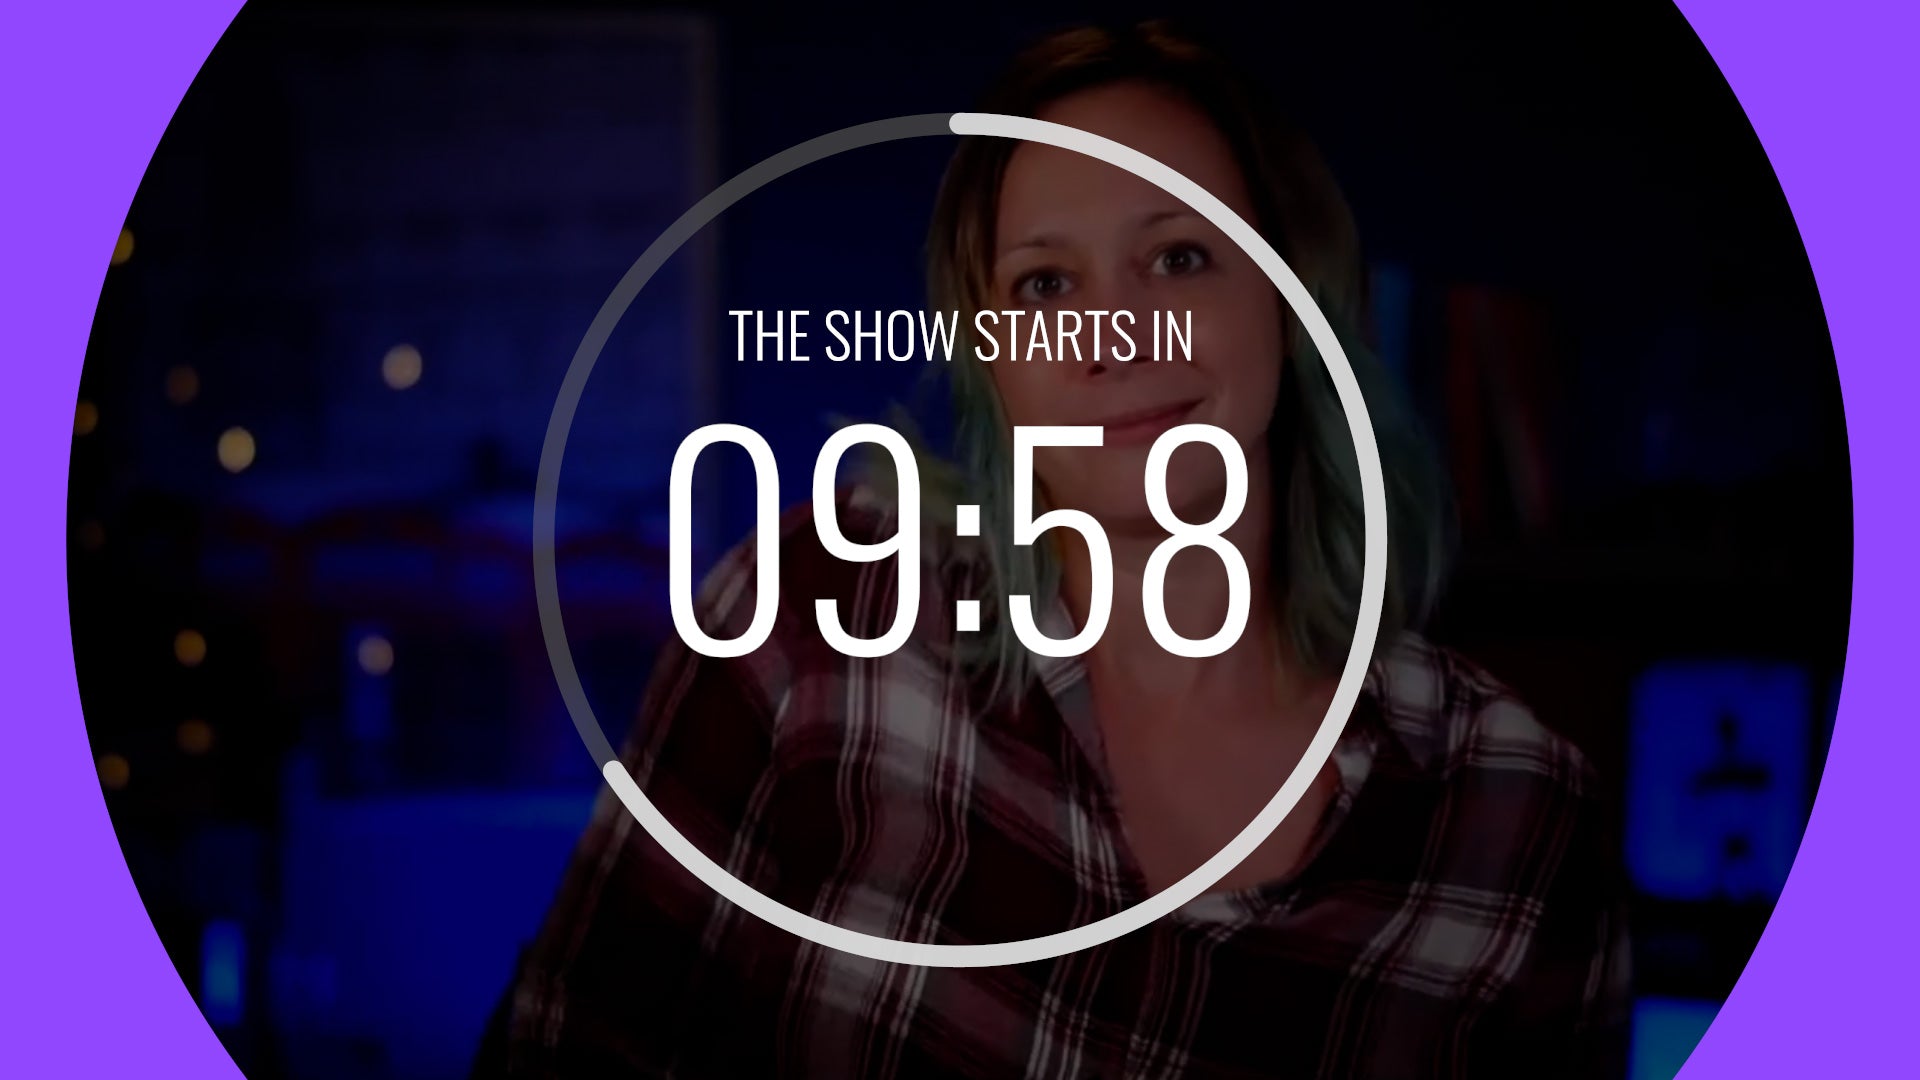 Countdown Timers for Live Streaming: Everything You Need to Know